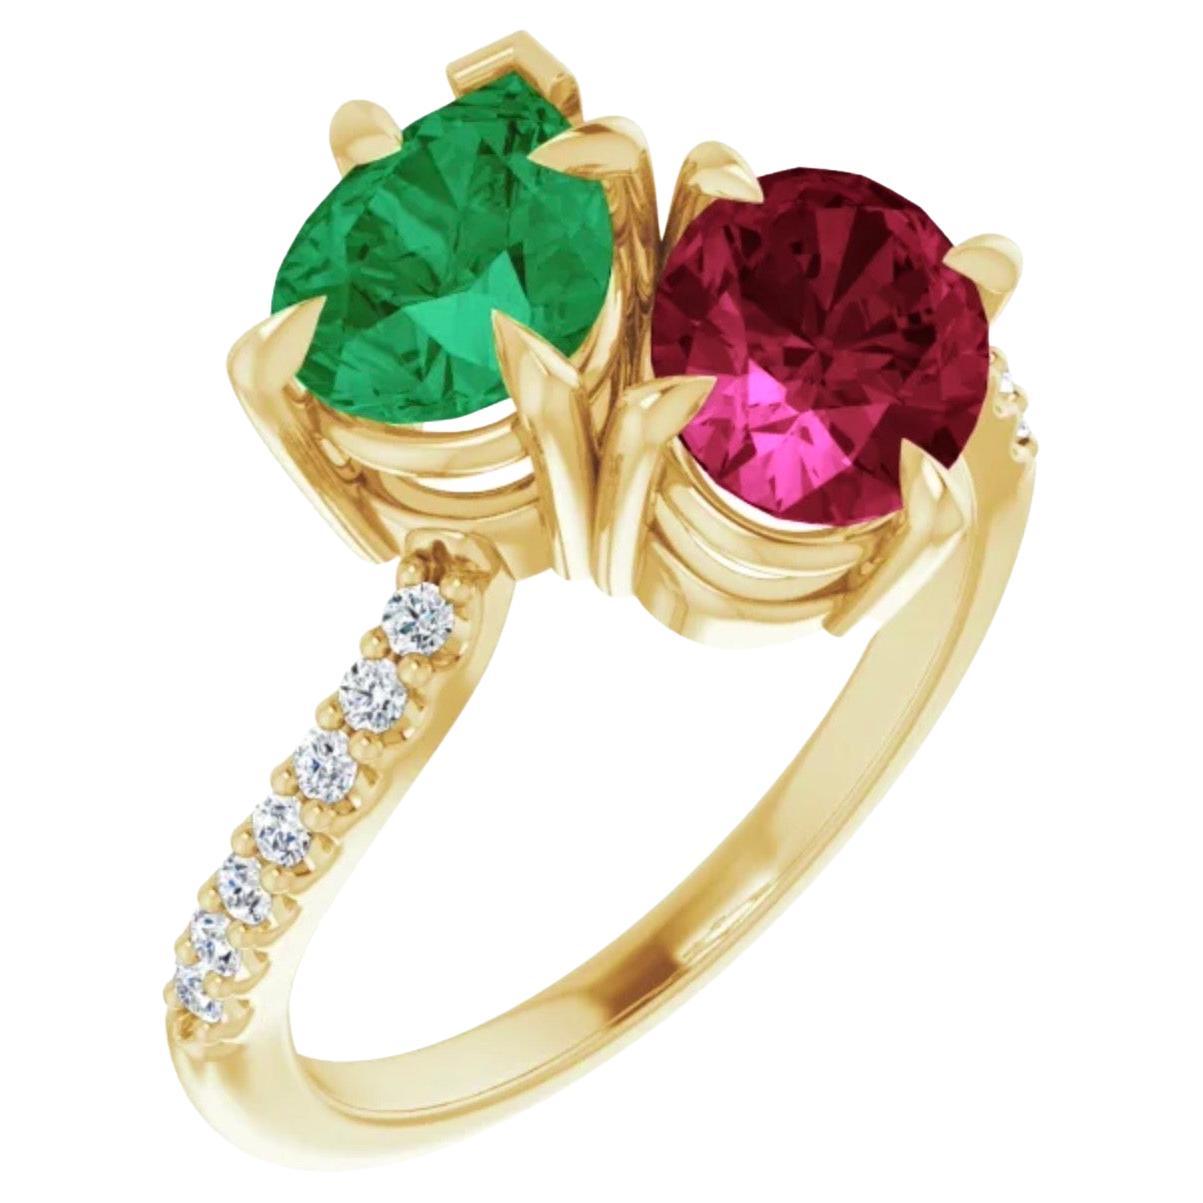 Ruby and Emerald Bypass "Toi Et Moi" Engagement Ring